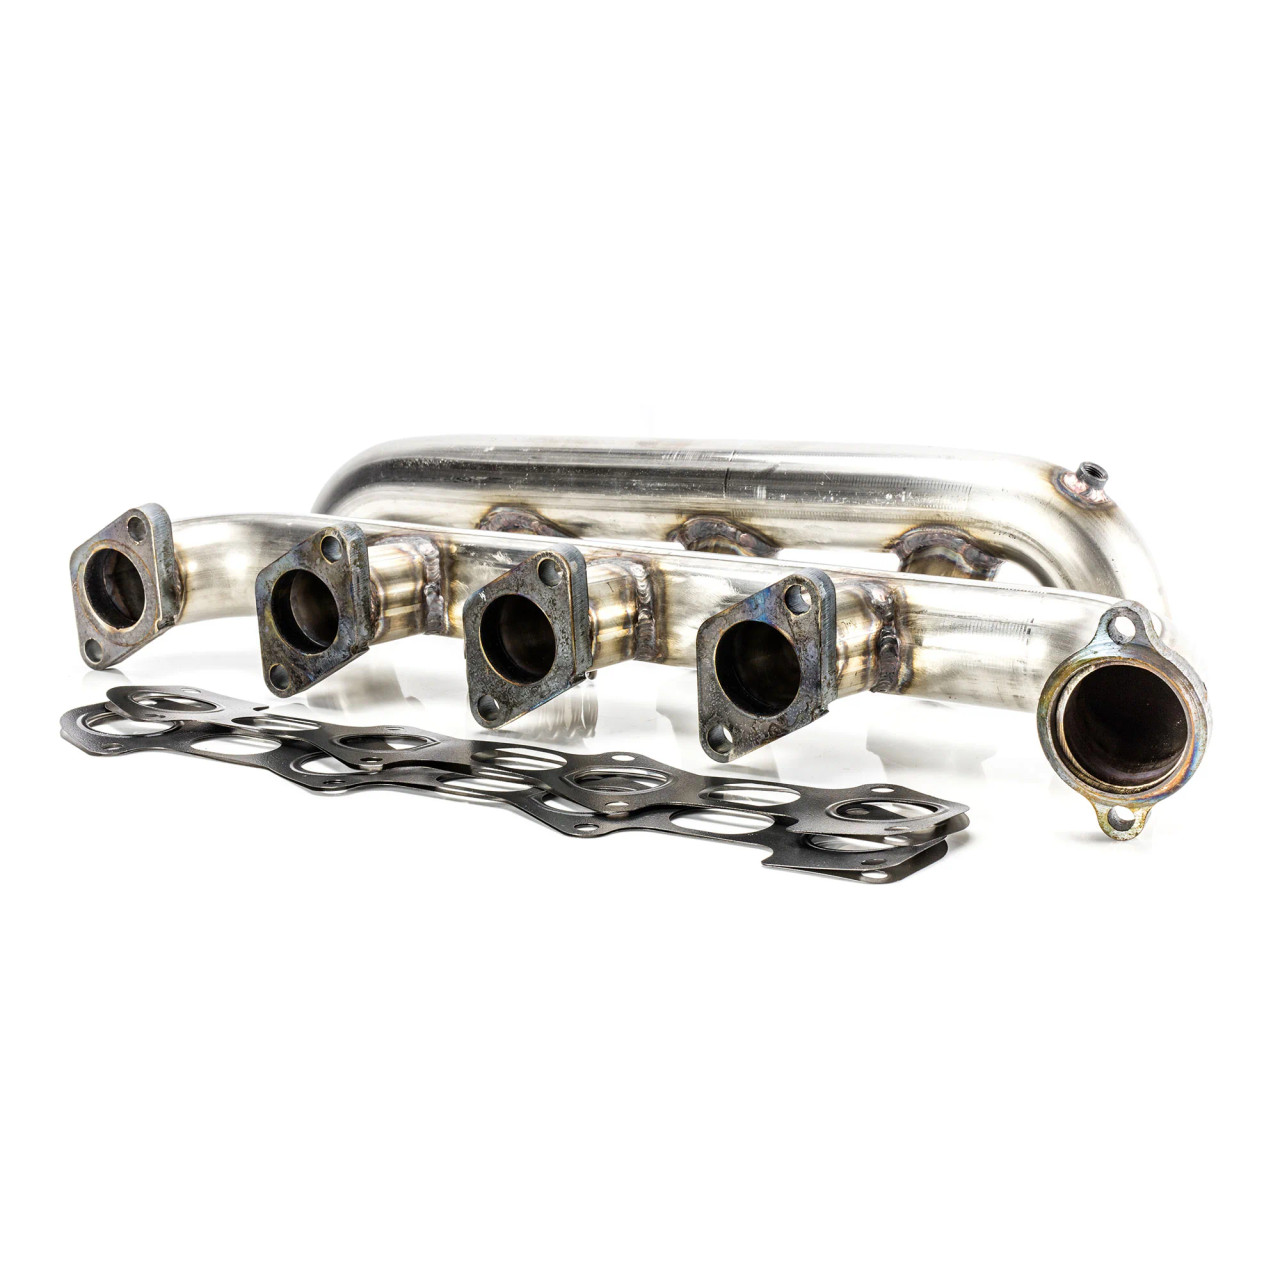 River City Diesel 304 STAINLESS STEEL TUBULAR EXHAUST MANIFOLD SET for FORD 6.0L Powerstroke (RCD-1730280002) Main View